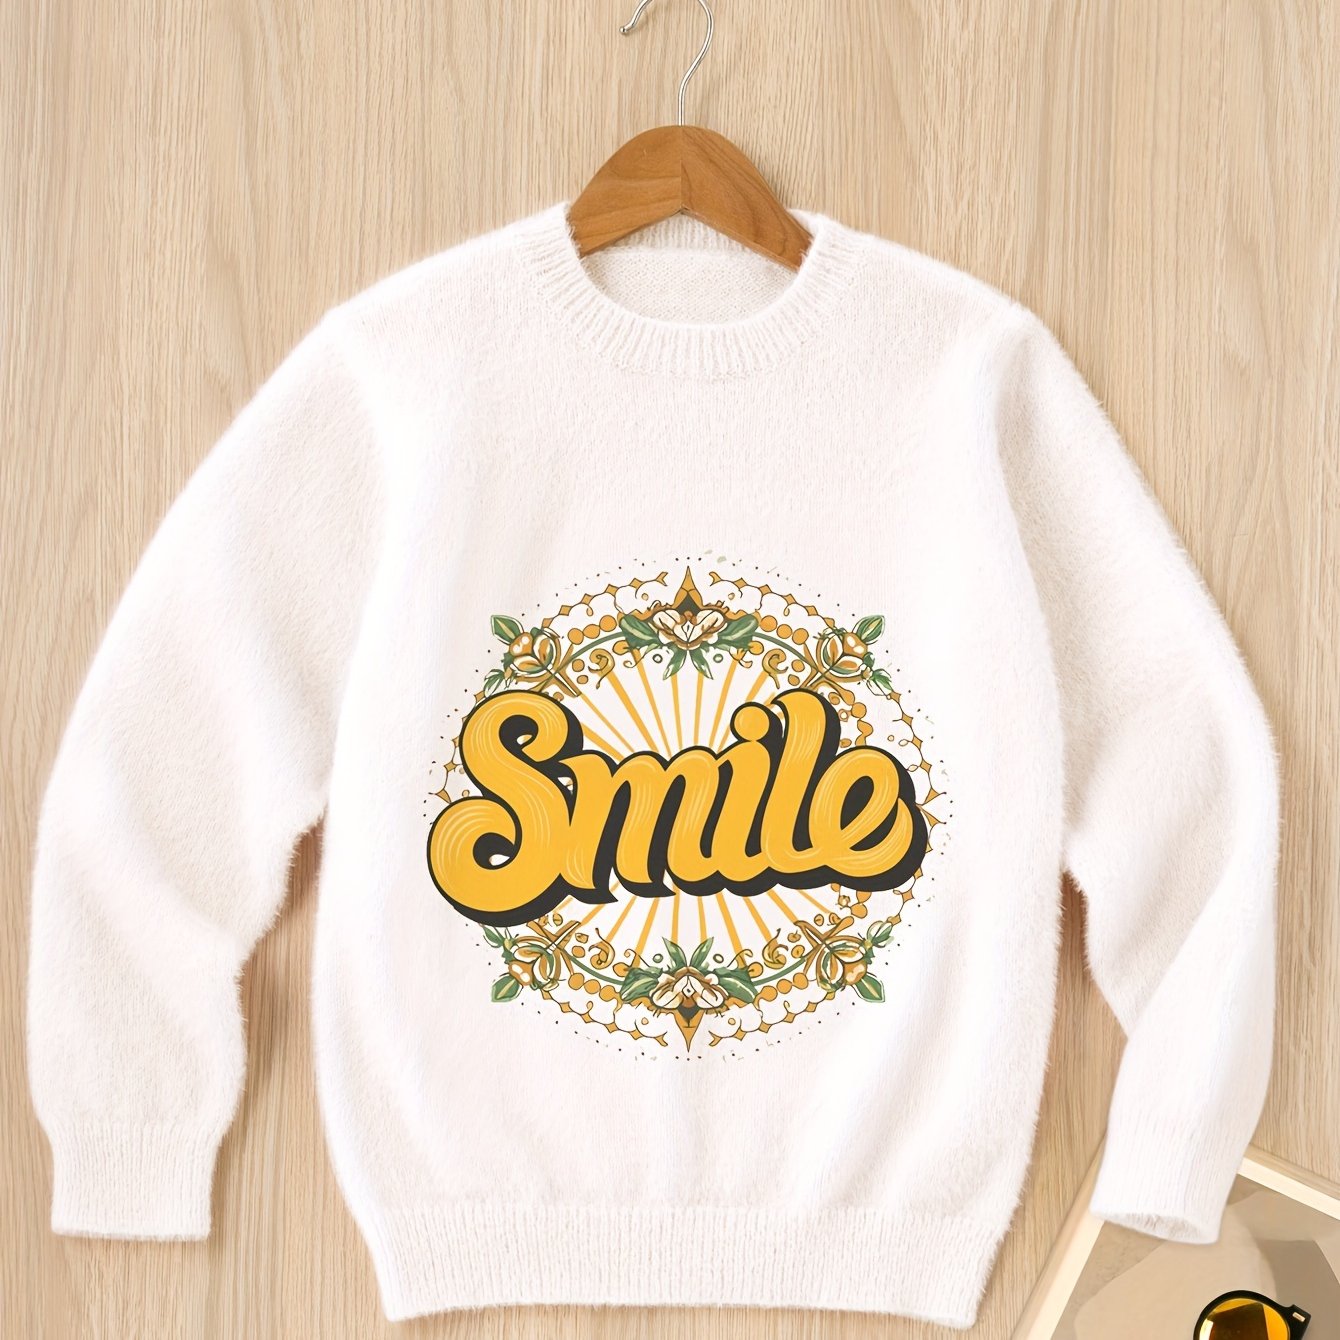 boys girls trendy knitwear smile graphic solid crew neck knit sweater cute style soft jumper top pullover